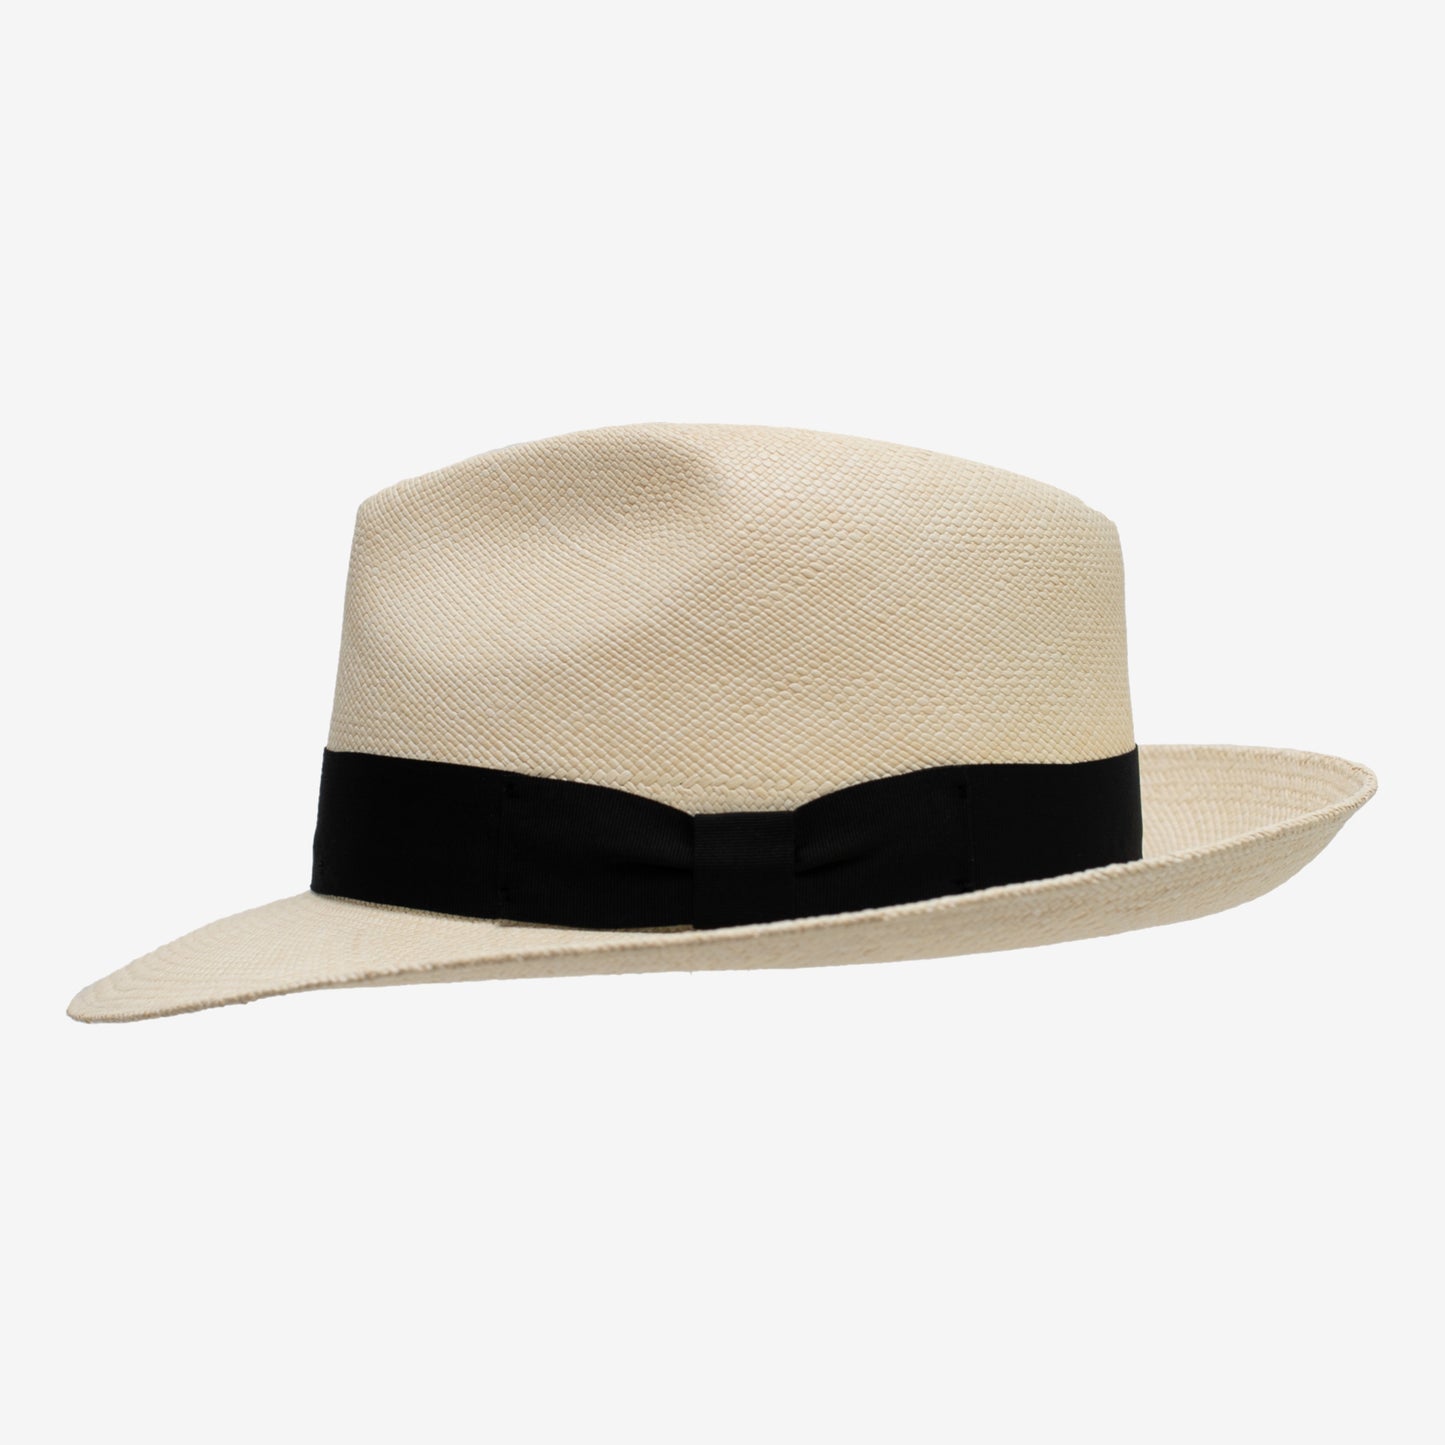 mindo-hats-the-don-galo-classic-straw-panama-hat-natural-left